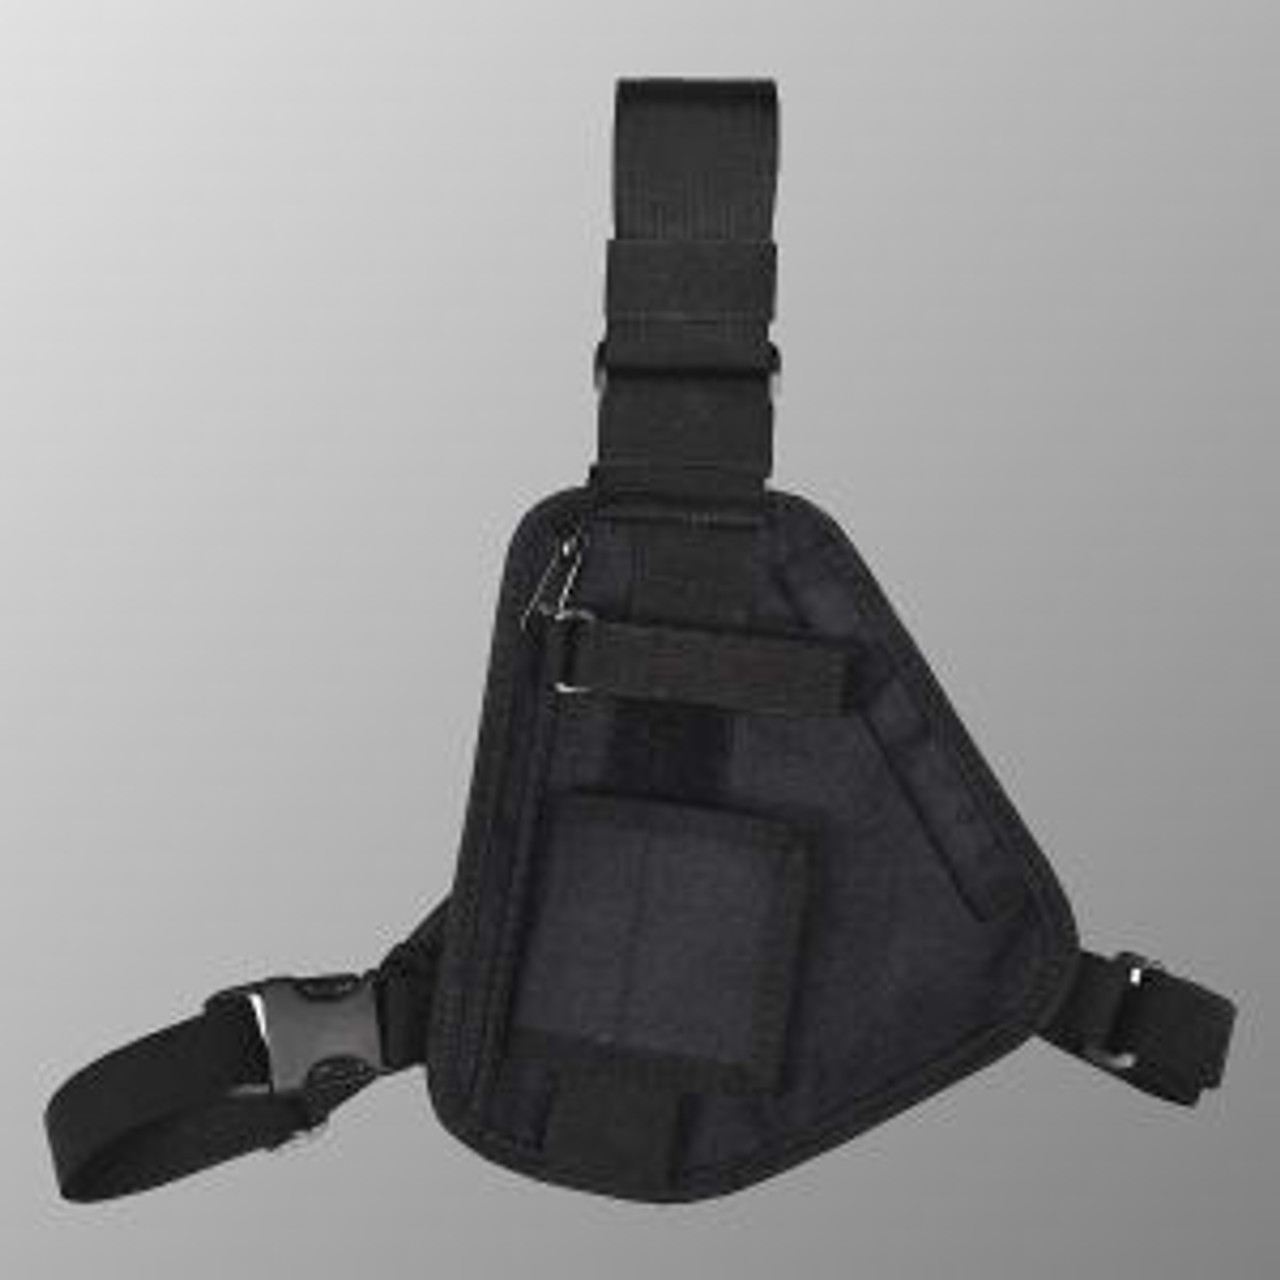 Motorola XPR6550 3-Point Chest Harness - Black